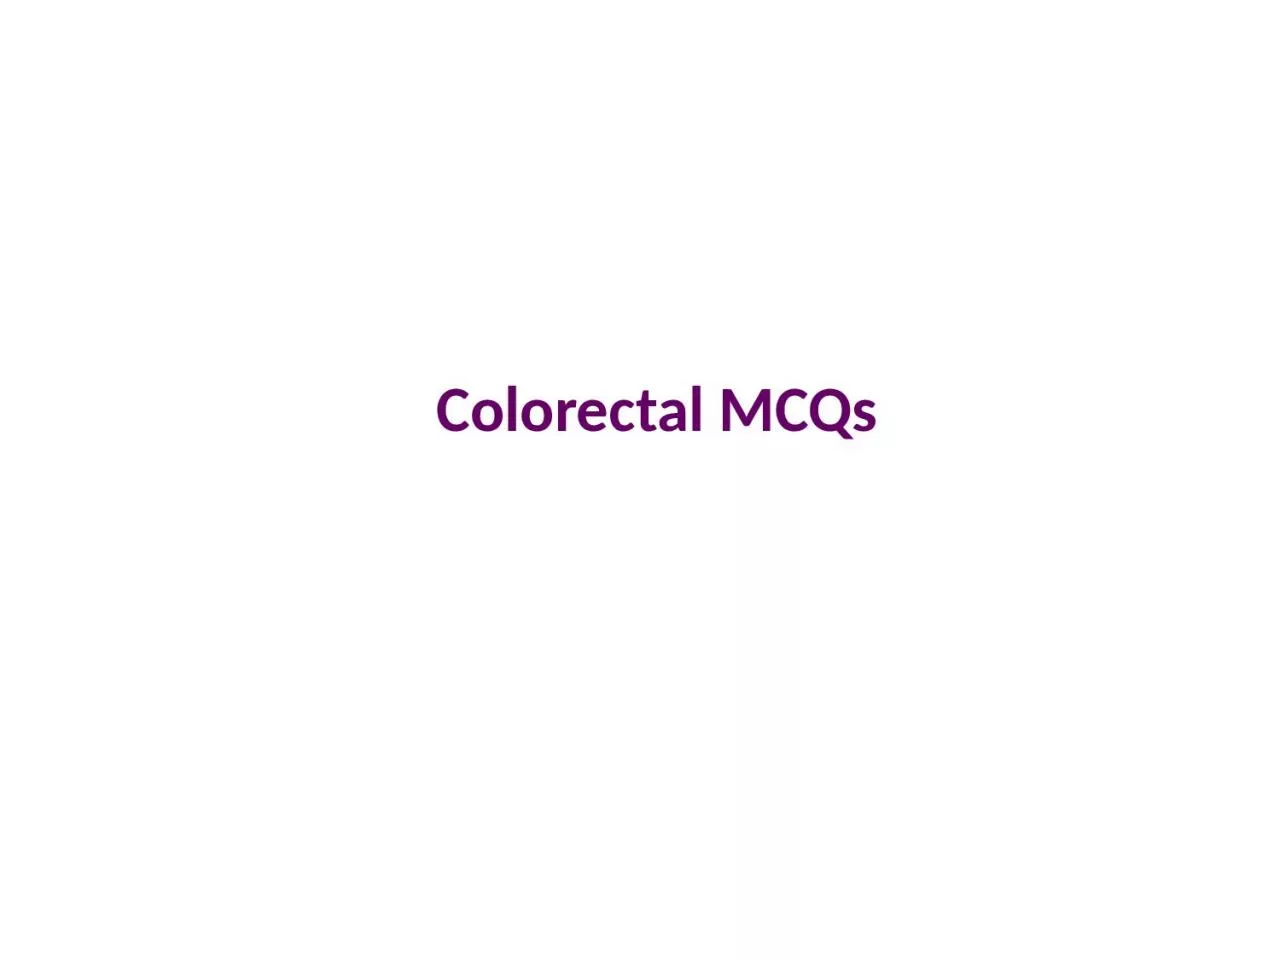 Colorectal MCQs TNM Staging of colorectal cancer